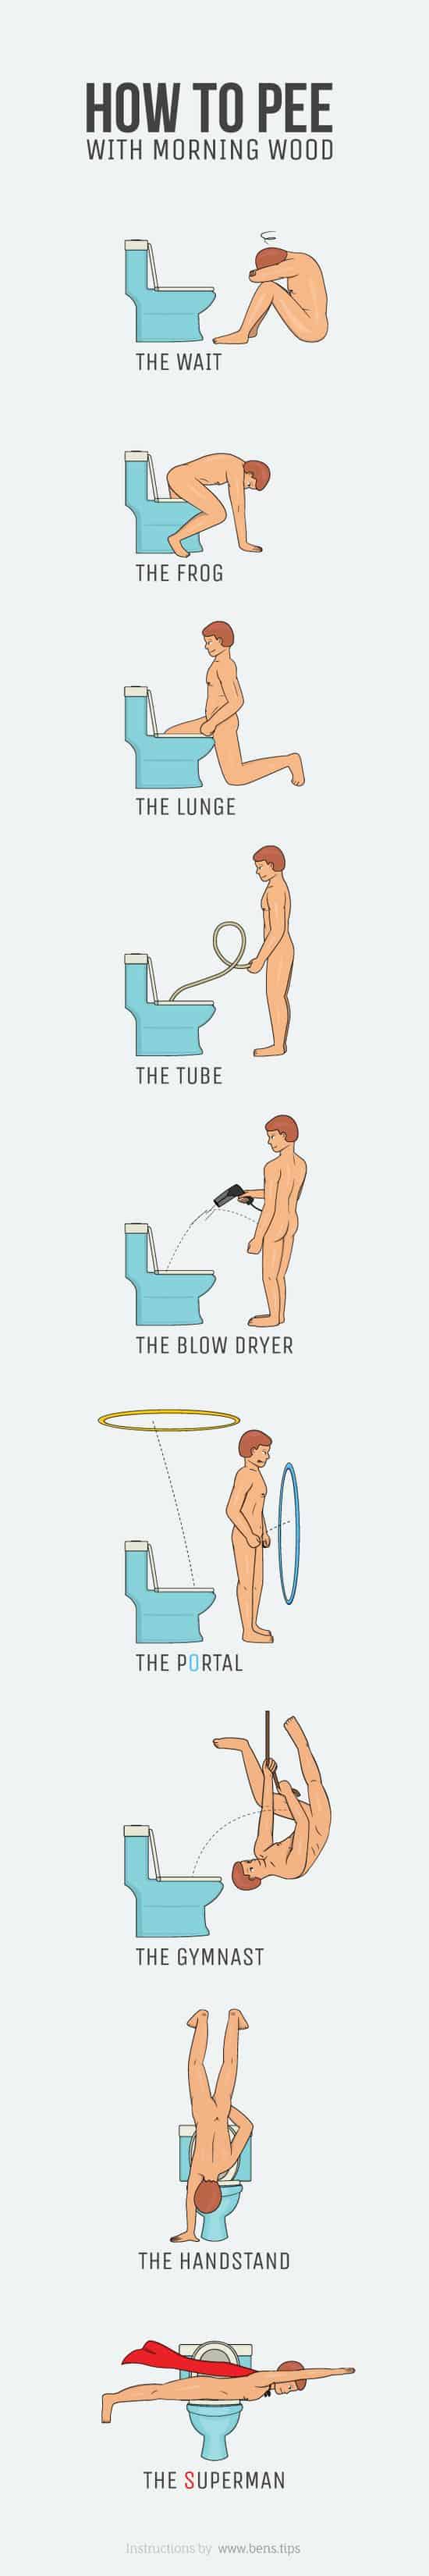 How to pee with a morning stick